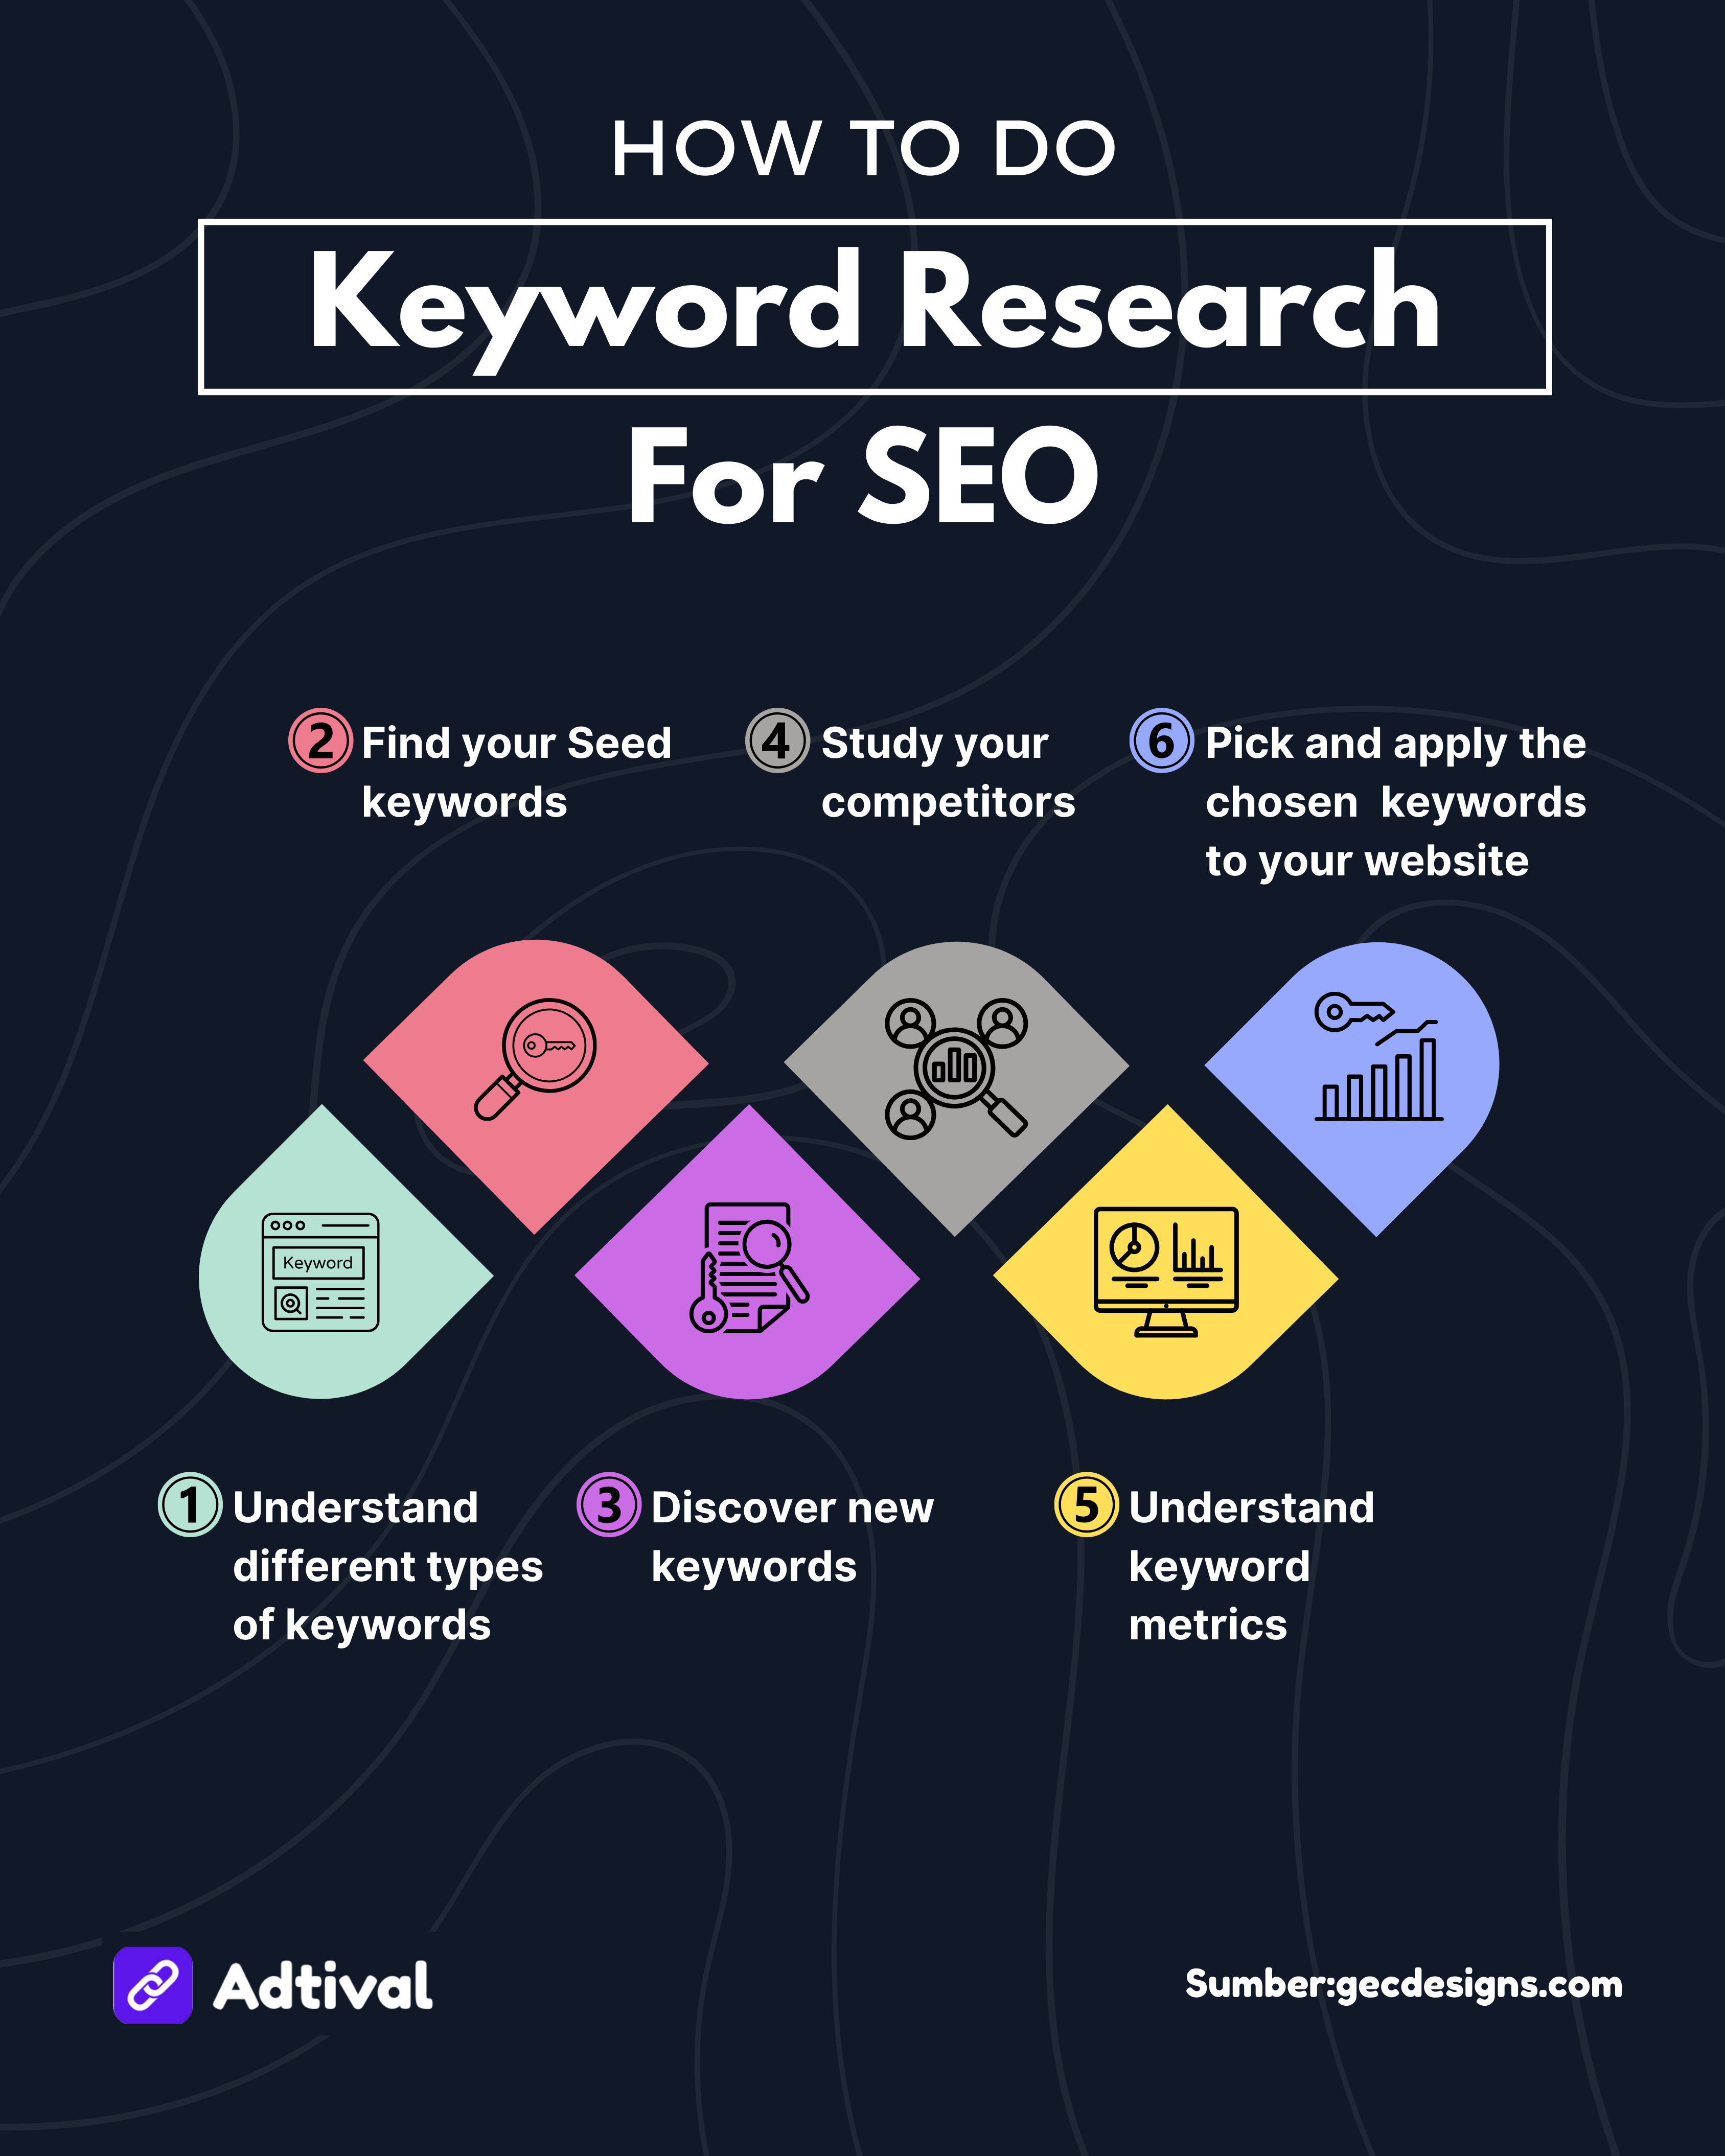 How to do Keyword Research for SEO